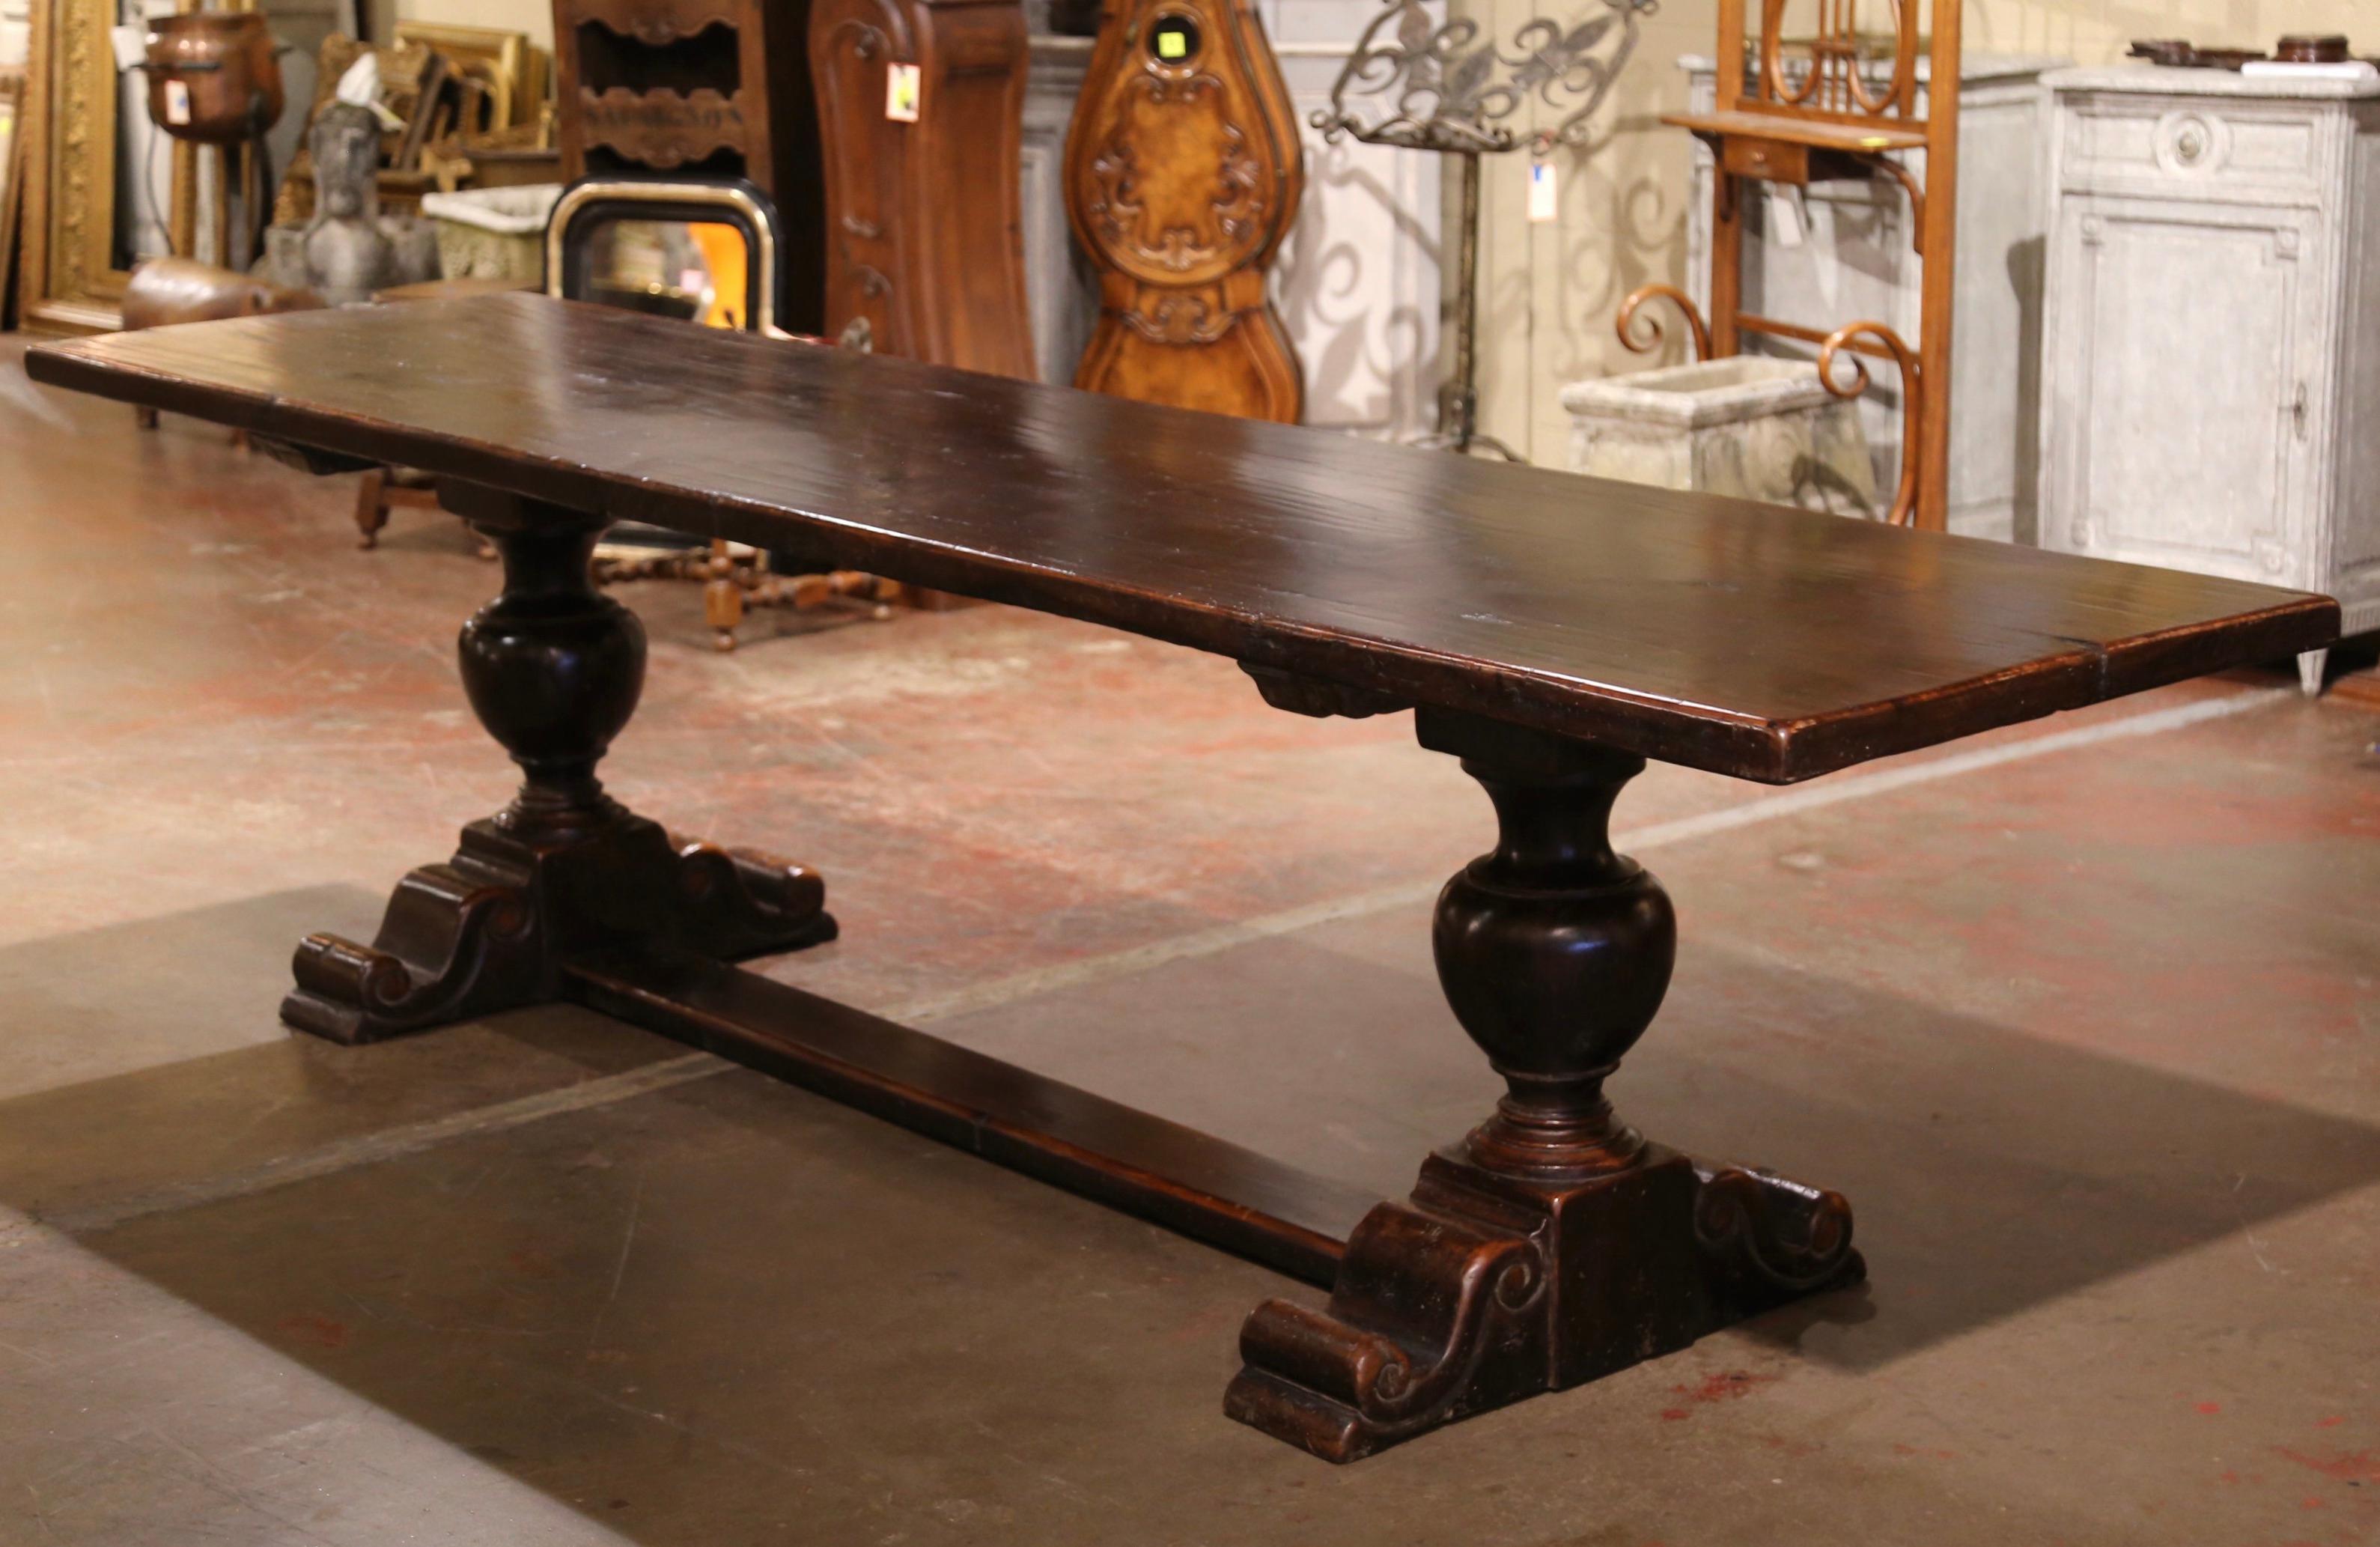 This elegant antique 10 foot monastery dining table was crafted in France, circa 1850. Standing on two carved turned pedestal legs ending with shoe base and joined by bottom stretcher attached with key and tenon, the provincial table is dressed with